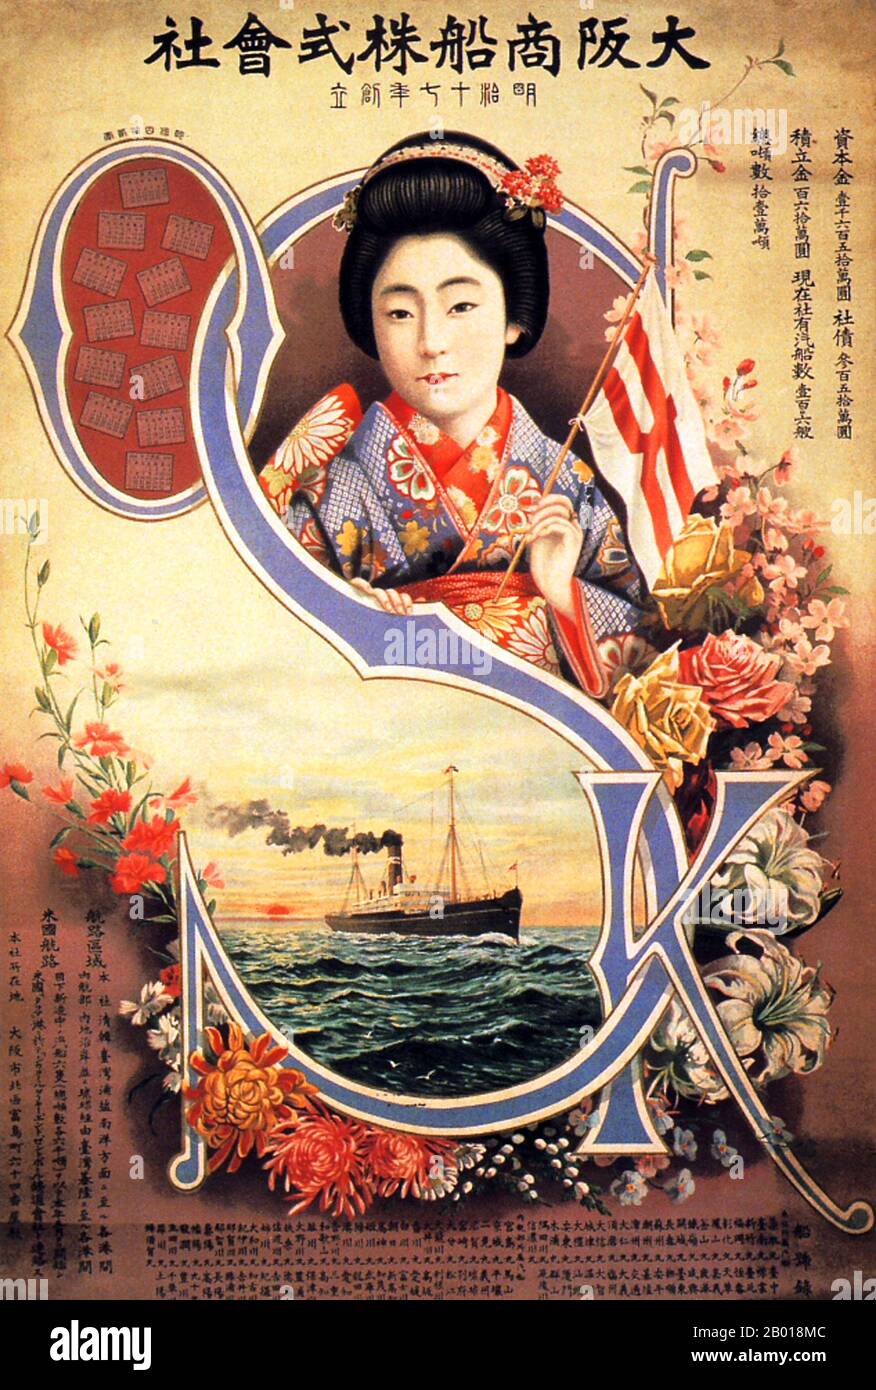 Japan: Poster advertisement for the Osaka Mercantile Steamship Company, 1909.  Osaka Mercantile Steamship poster featuring a Japanese woman elaborately clad in traditional kimono. Stock Photo